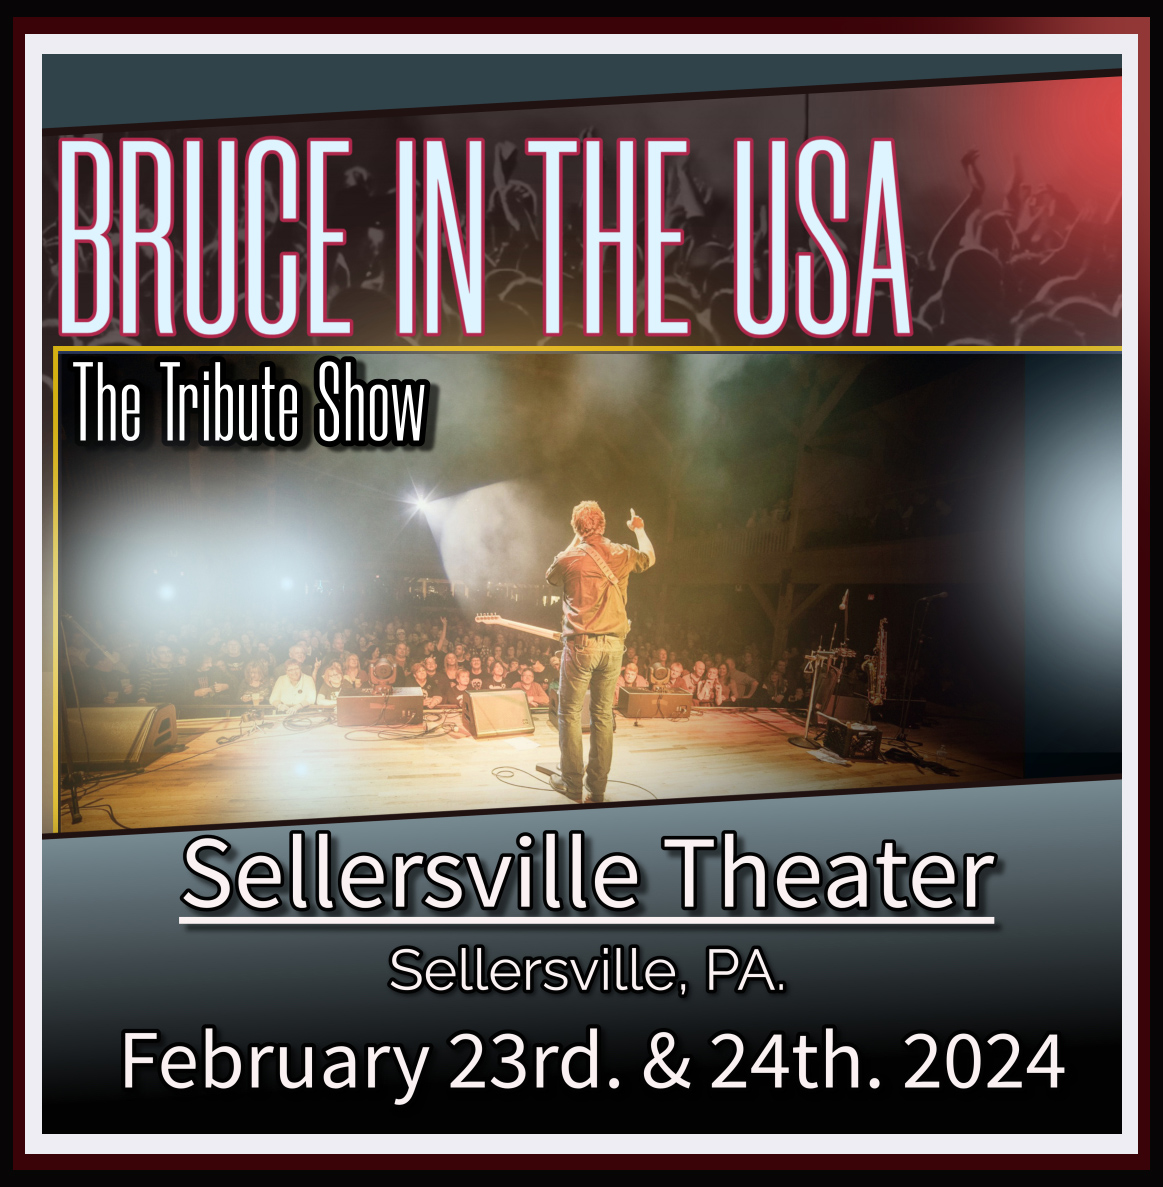 BRUCE IN THE USA - The Bruce Springsteen Tribute Show will be performing at SELLERSVILLE THEATER, Sellersville, PA. Friday & Saturday - February 23rd. & 24th. 2024 Find out more... st94.com